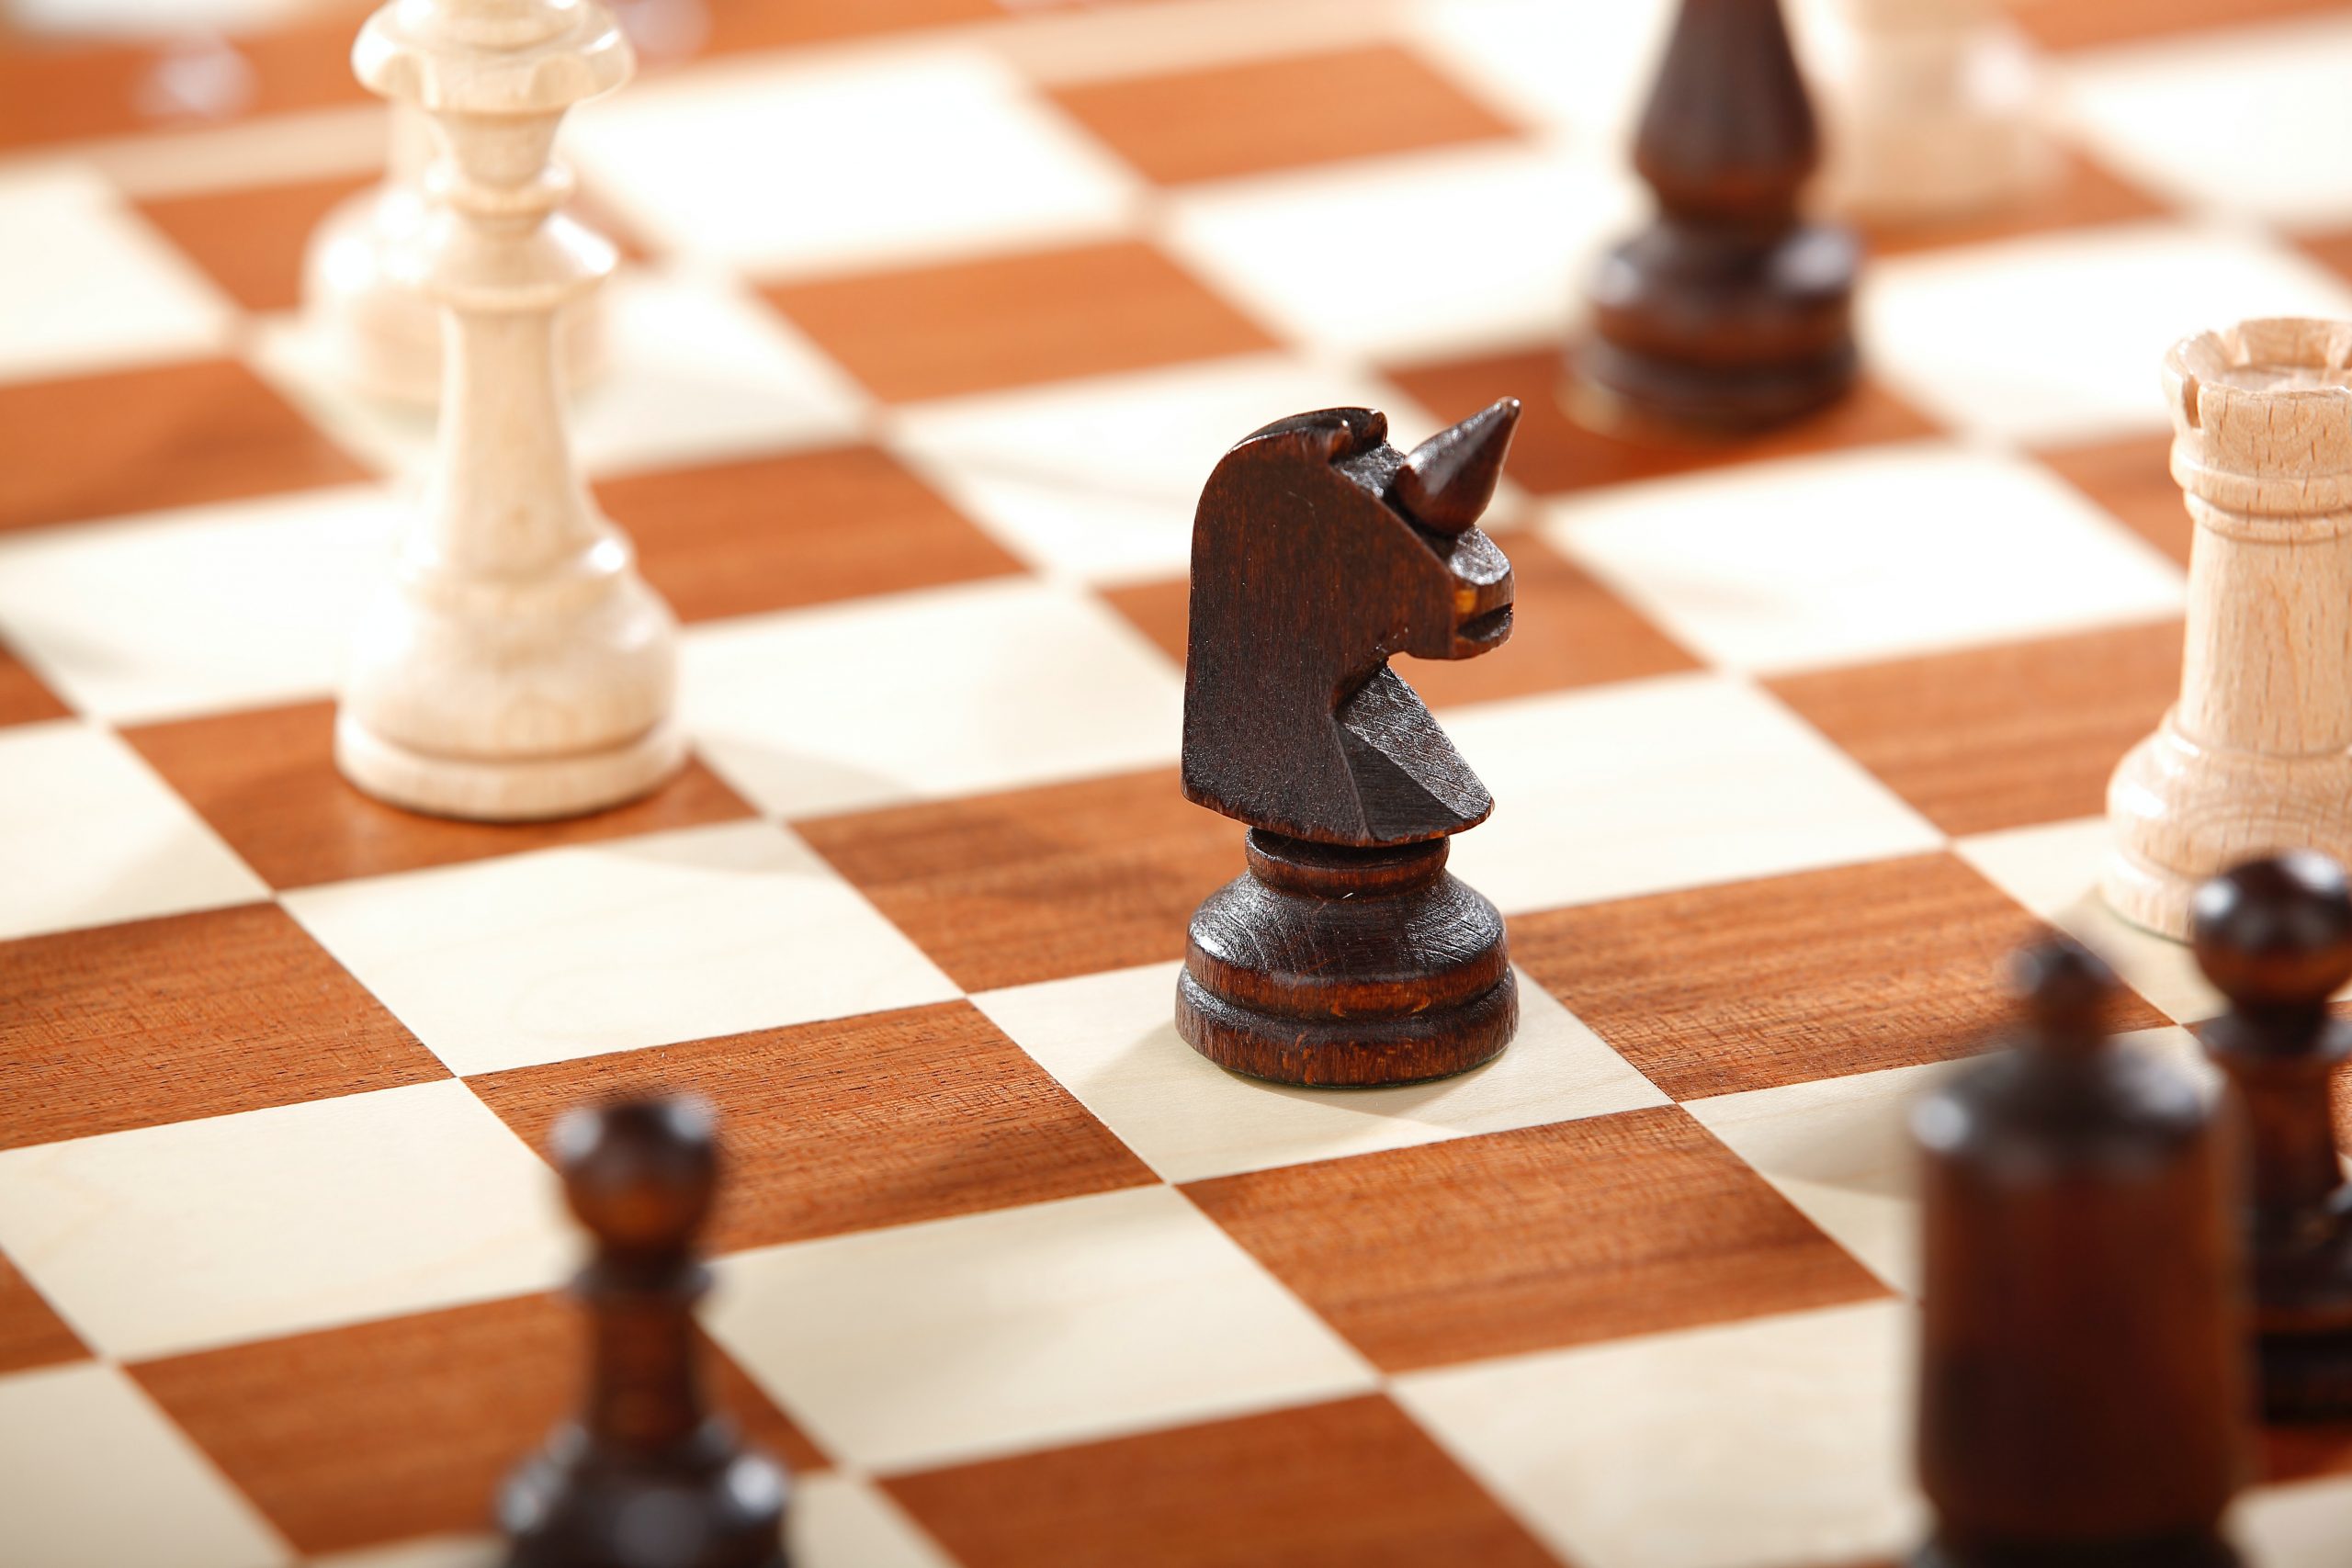 World Chess to issue digital tokens in stock market flotation